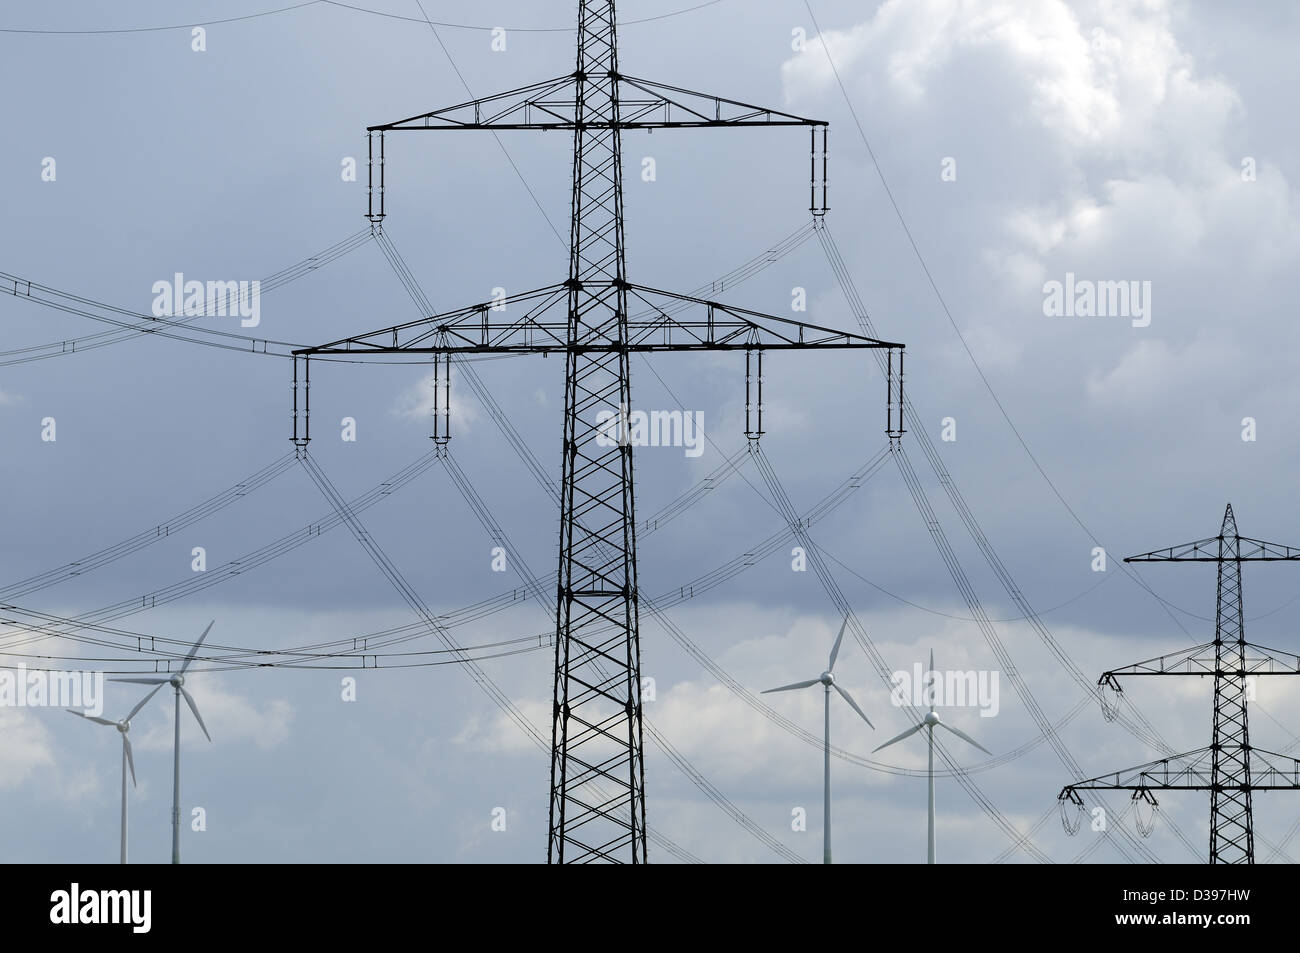 Emmerthal, Germany, power lines and wind turbines Stock Photo